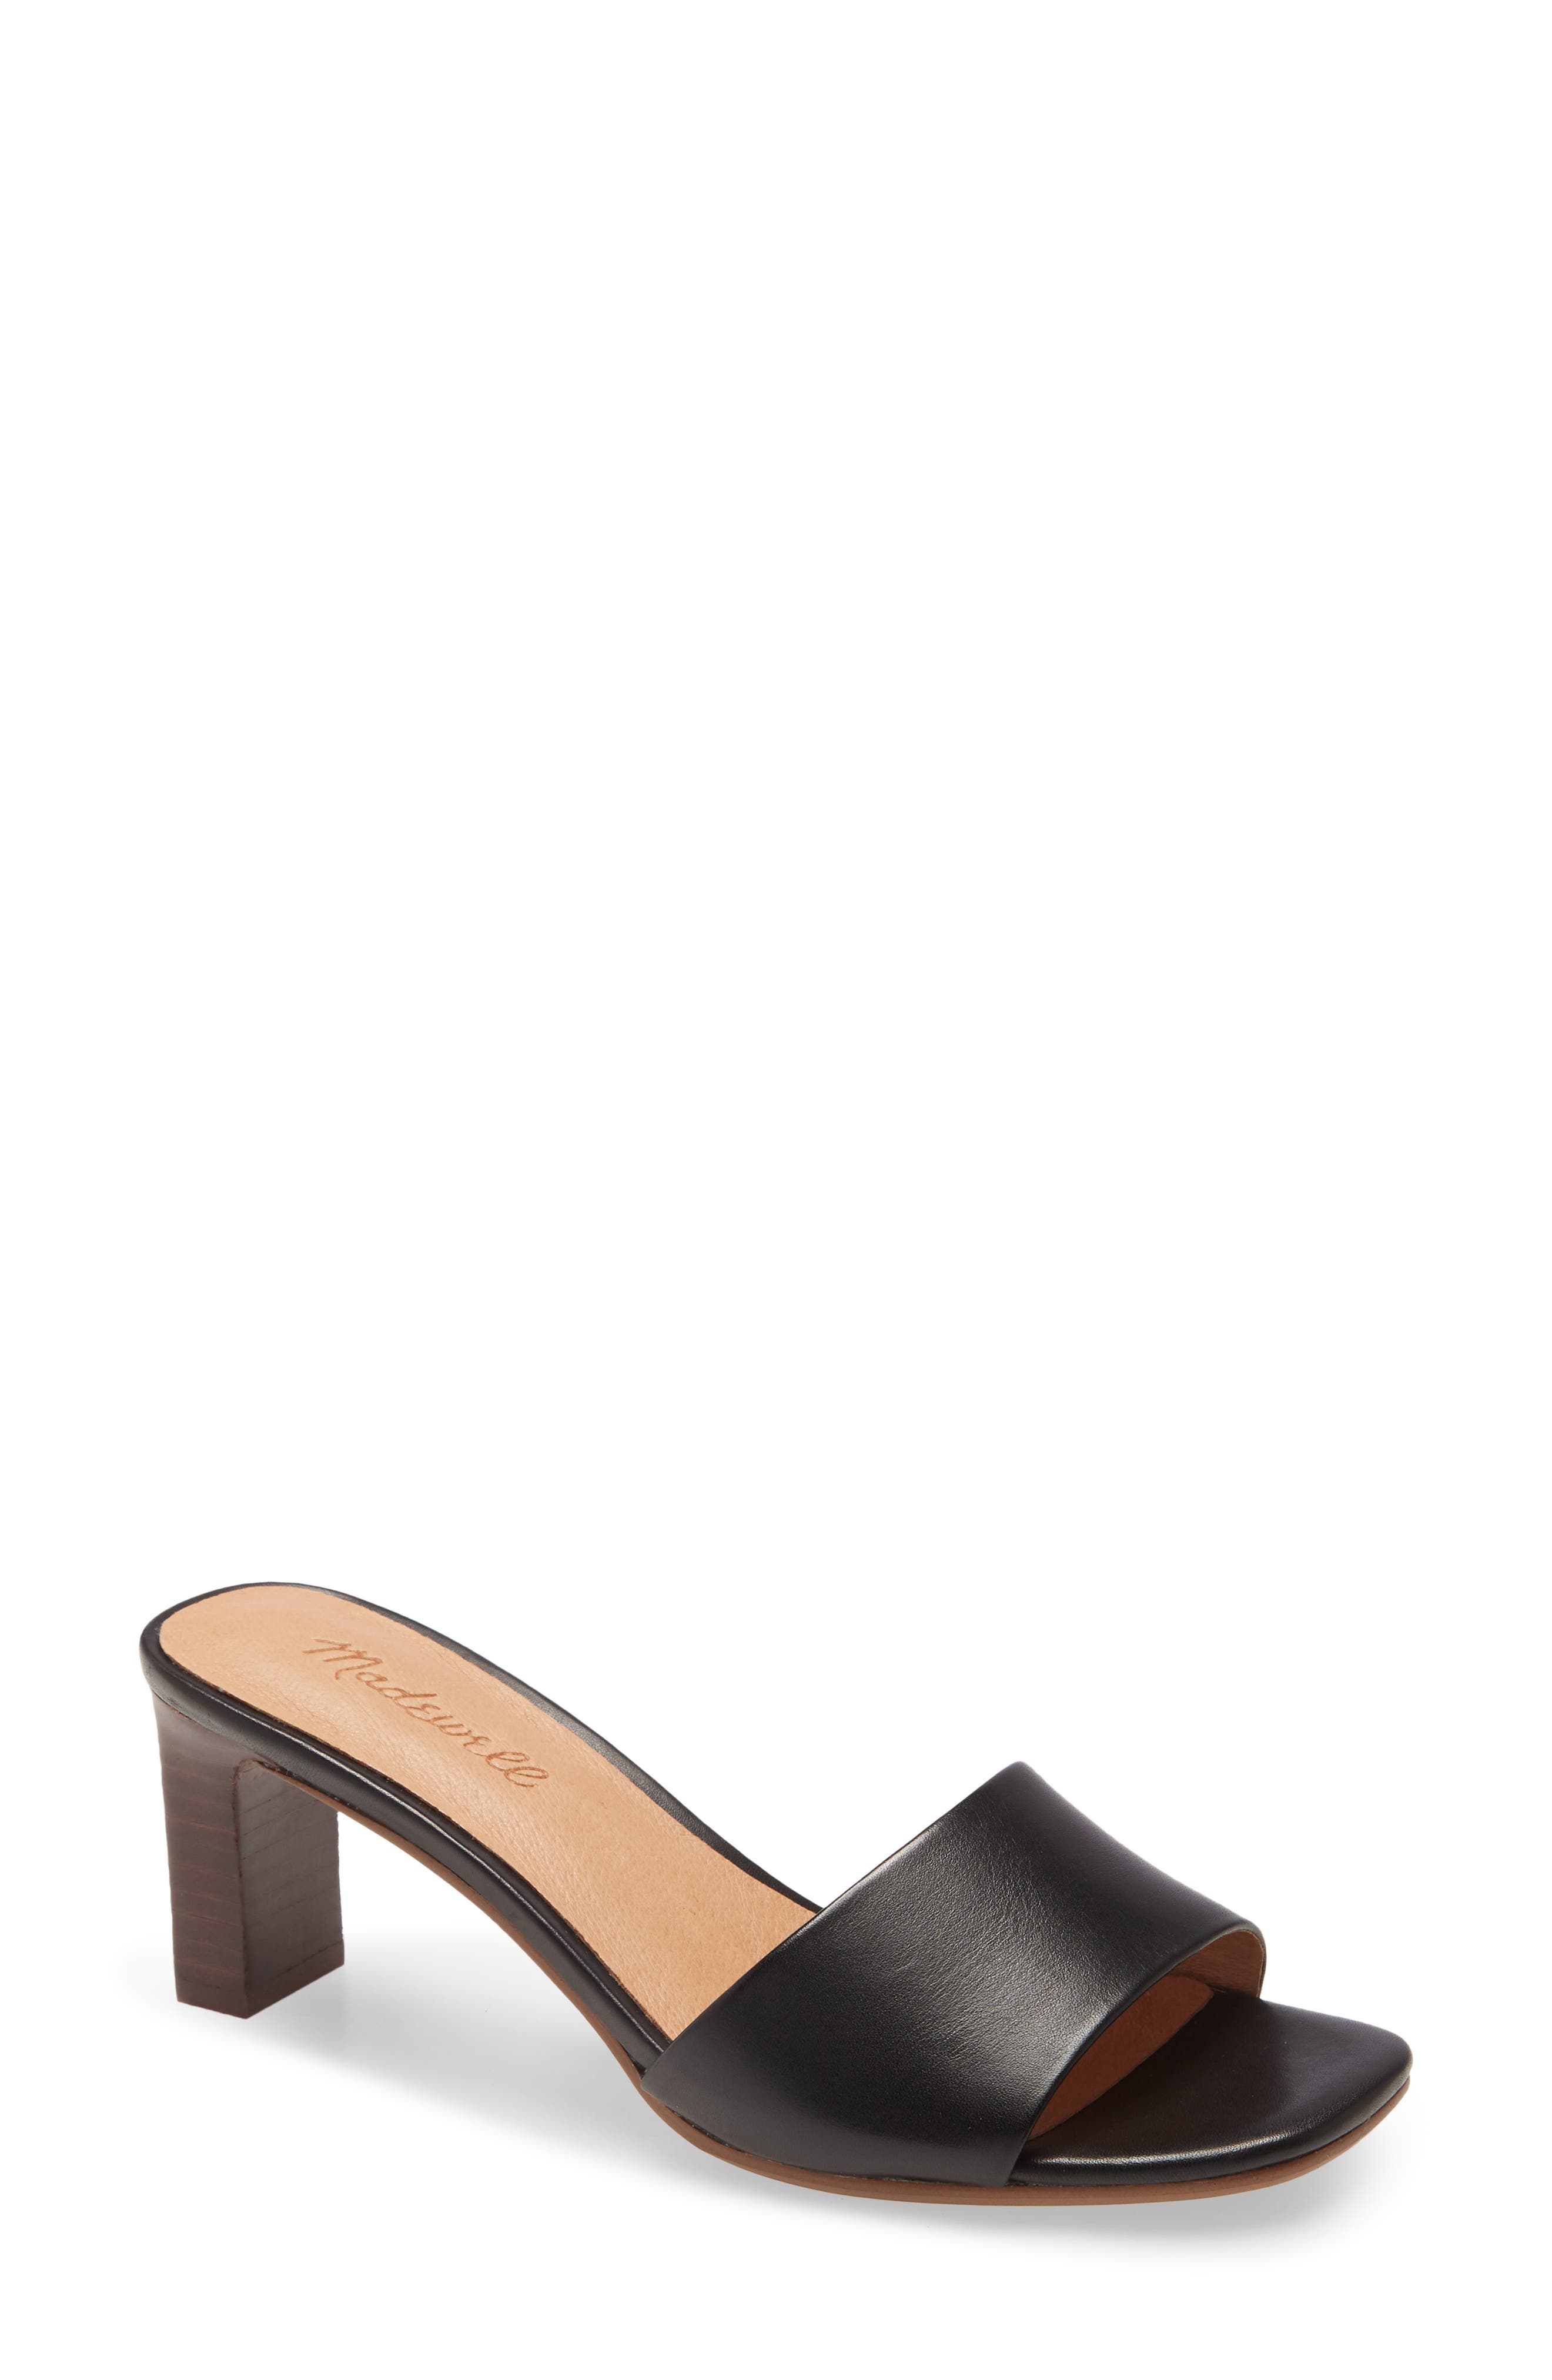 Women's Madewell Shoes | Nordstrom